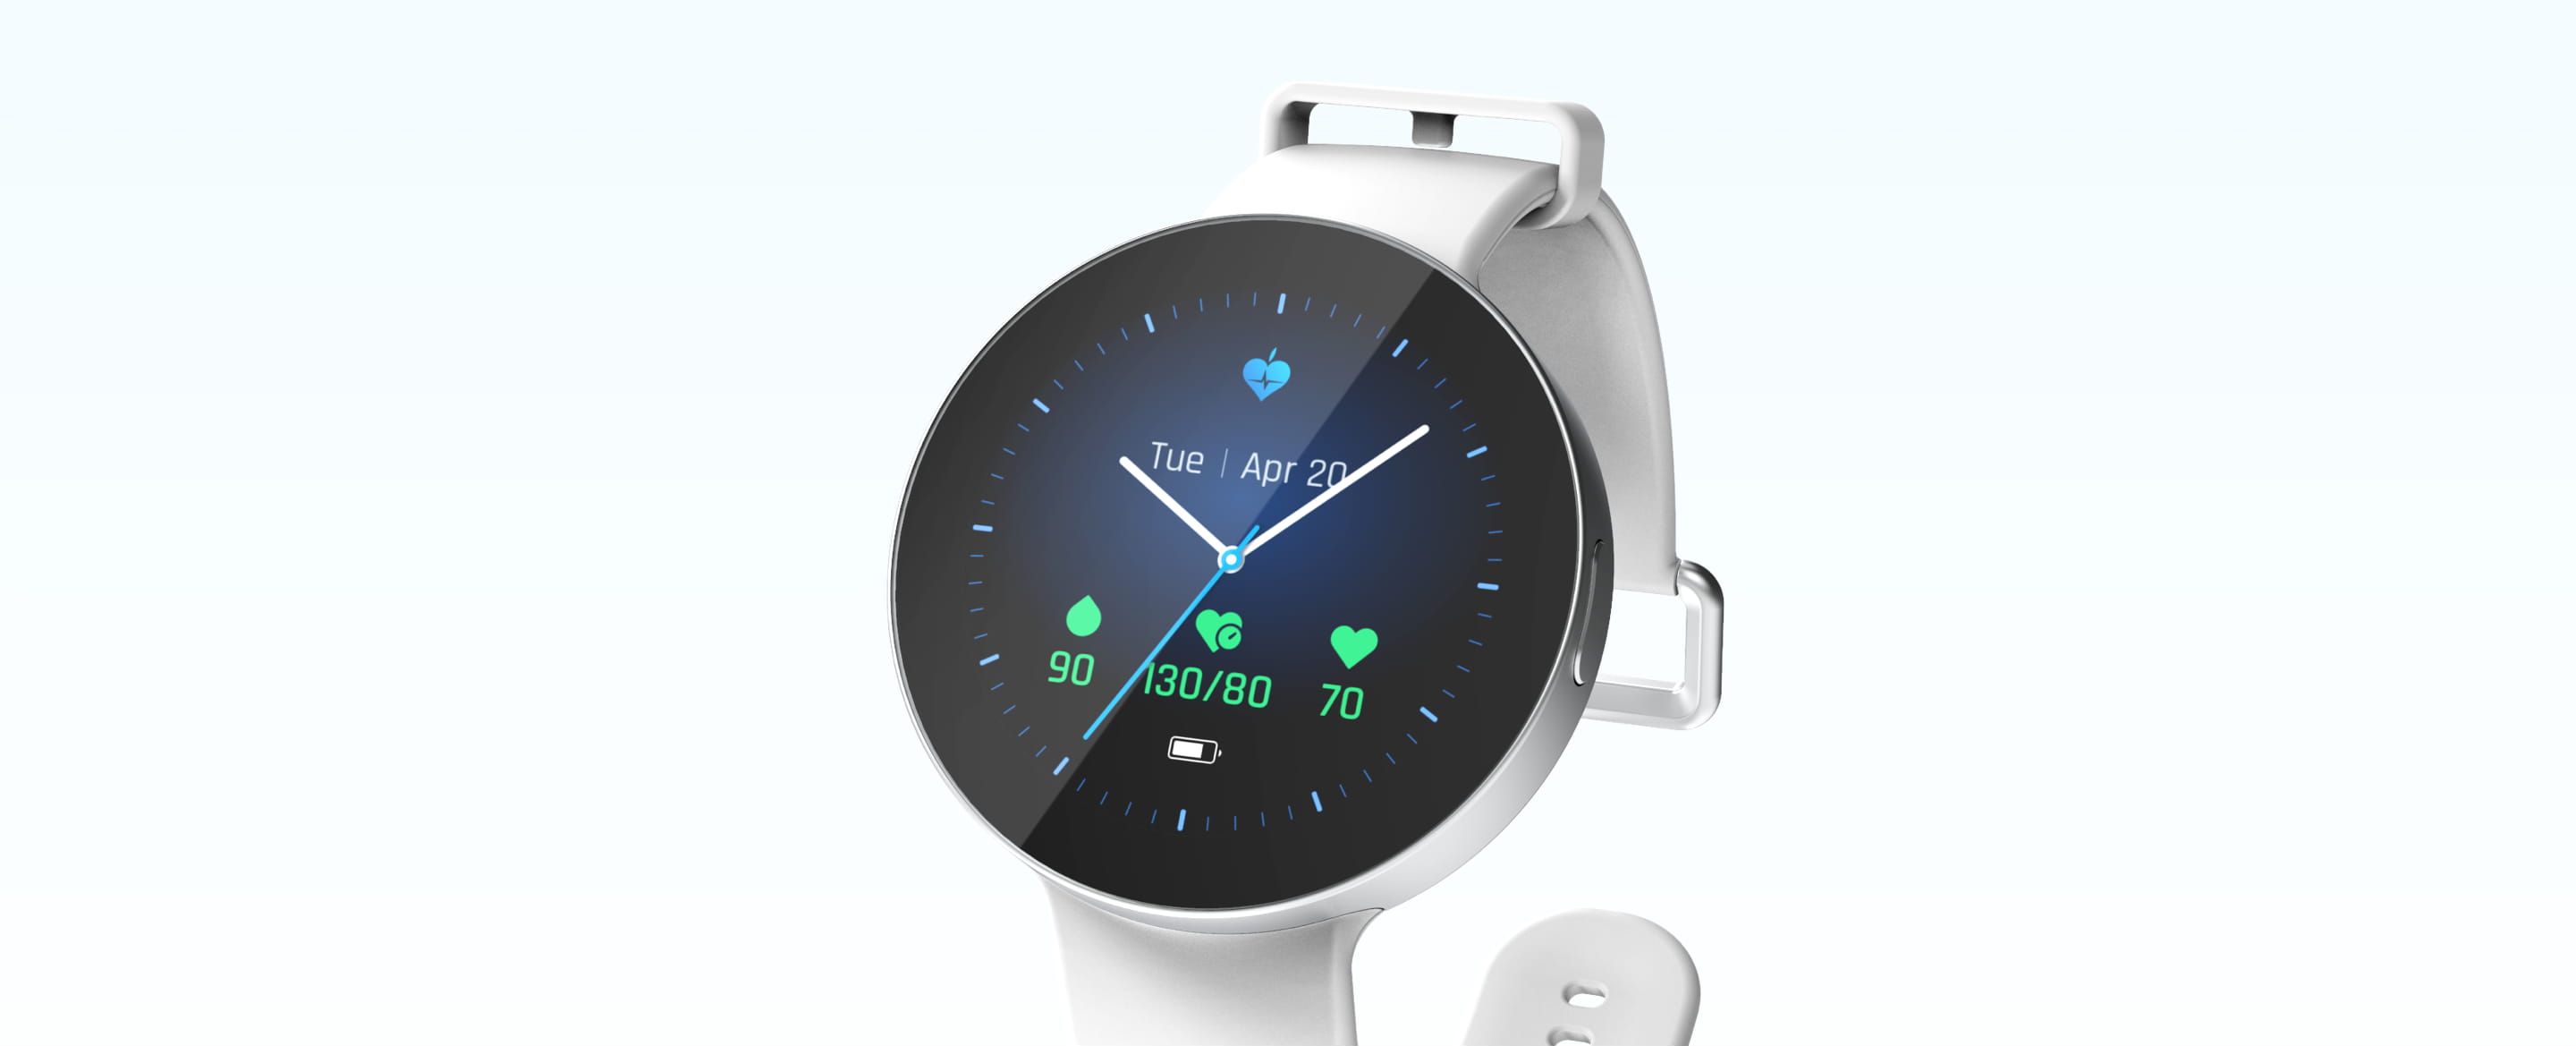 Rendering of LifePlus glucose-monitoring smart-watch, showing watch face